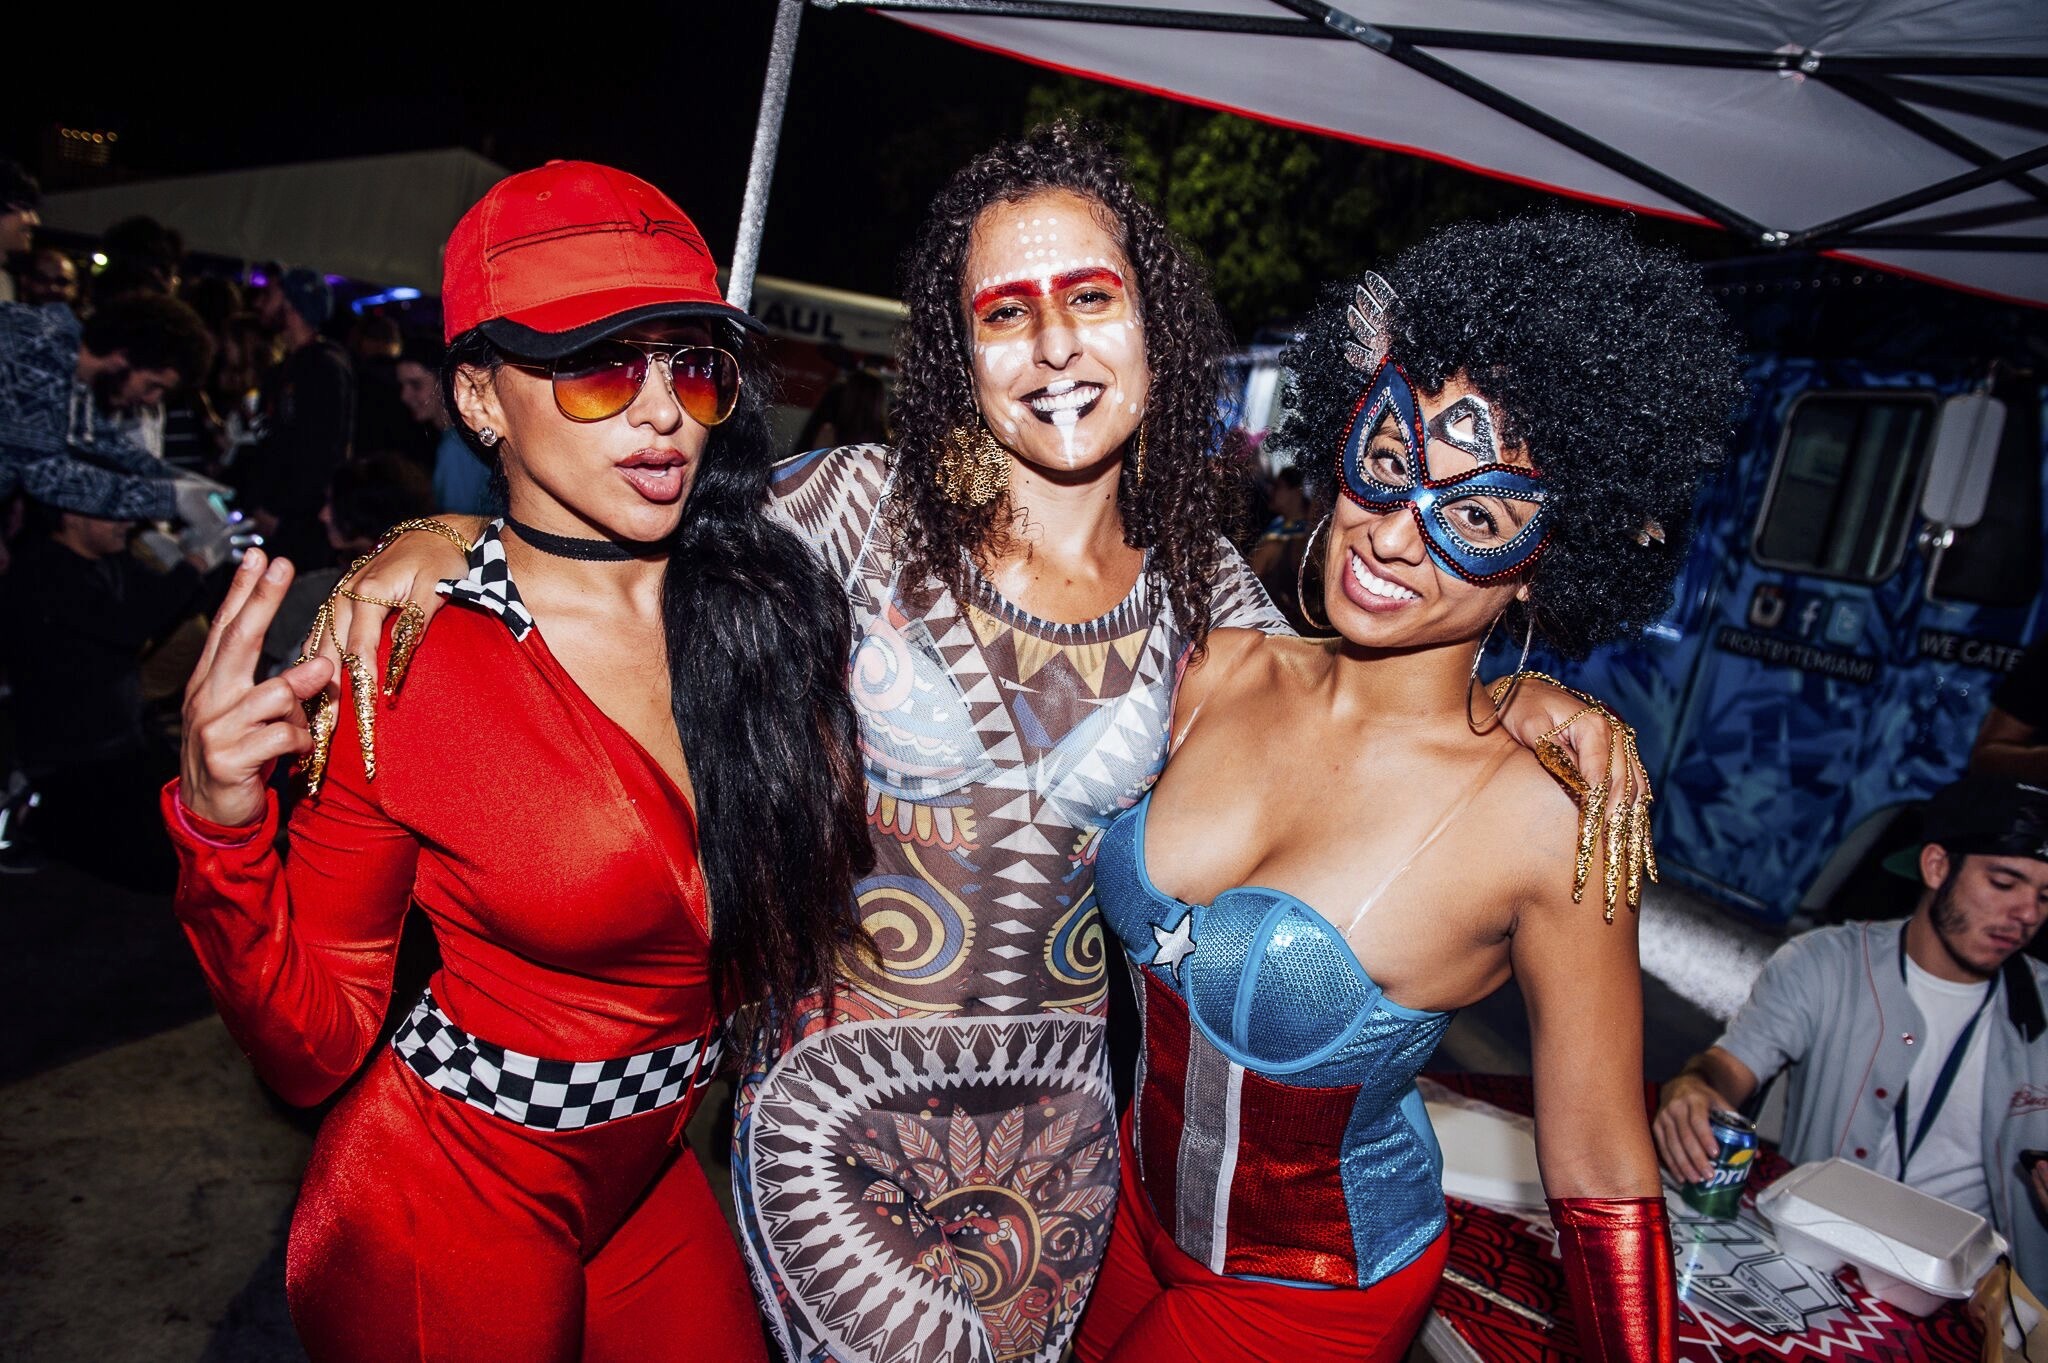 A guide to Halloween in South Florida